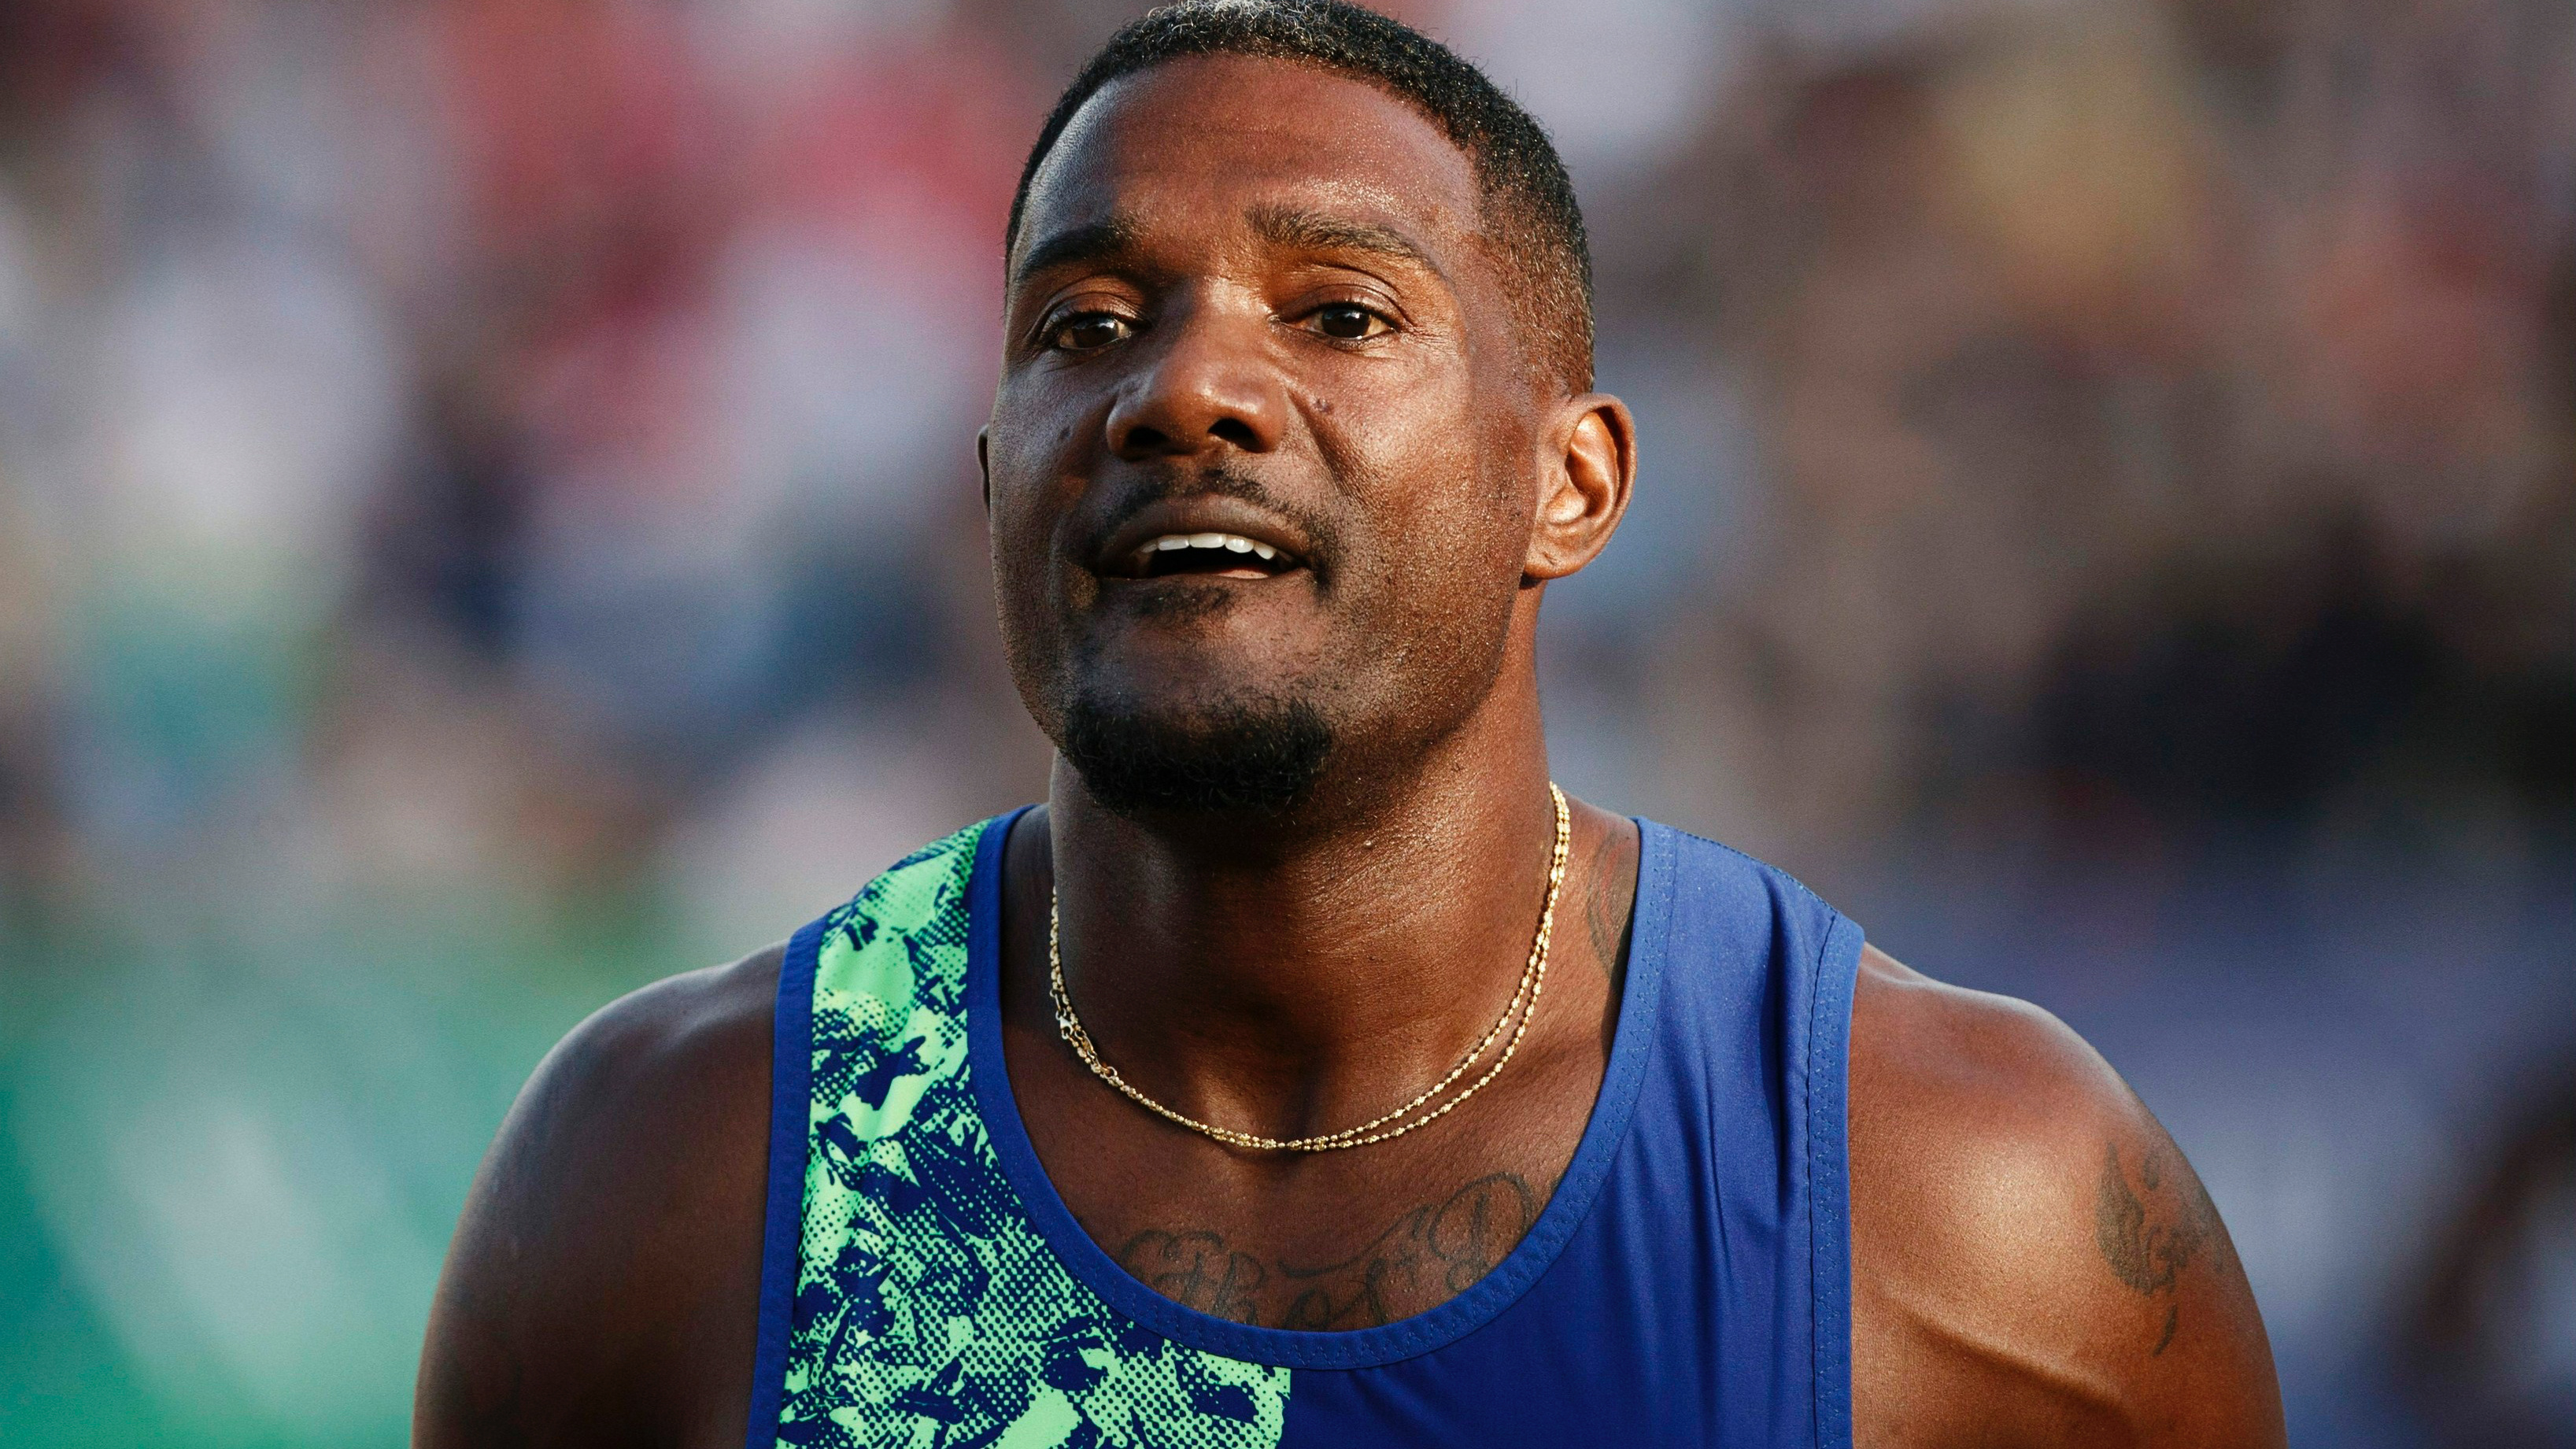 Justin Gatlin, Ongoing athleticism, Youthful energy, Olympic spirit, 3280x1850 HD Desktop